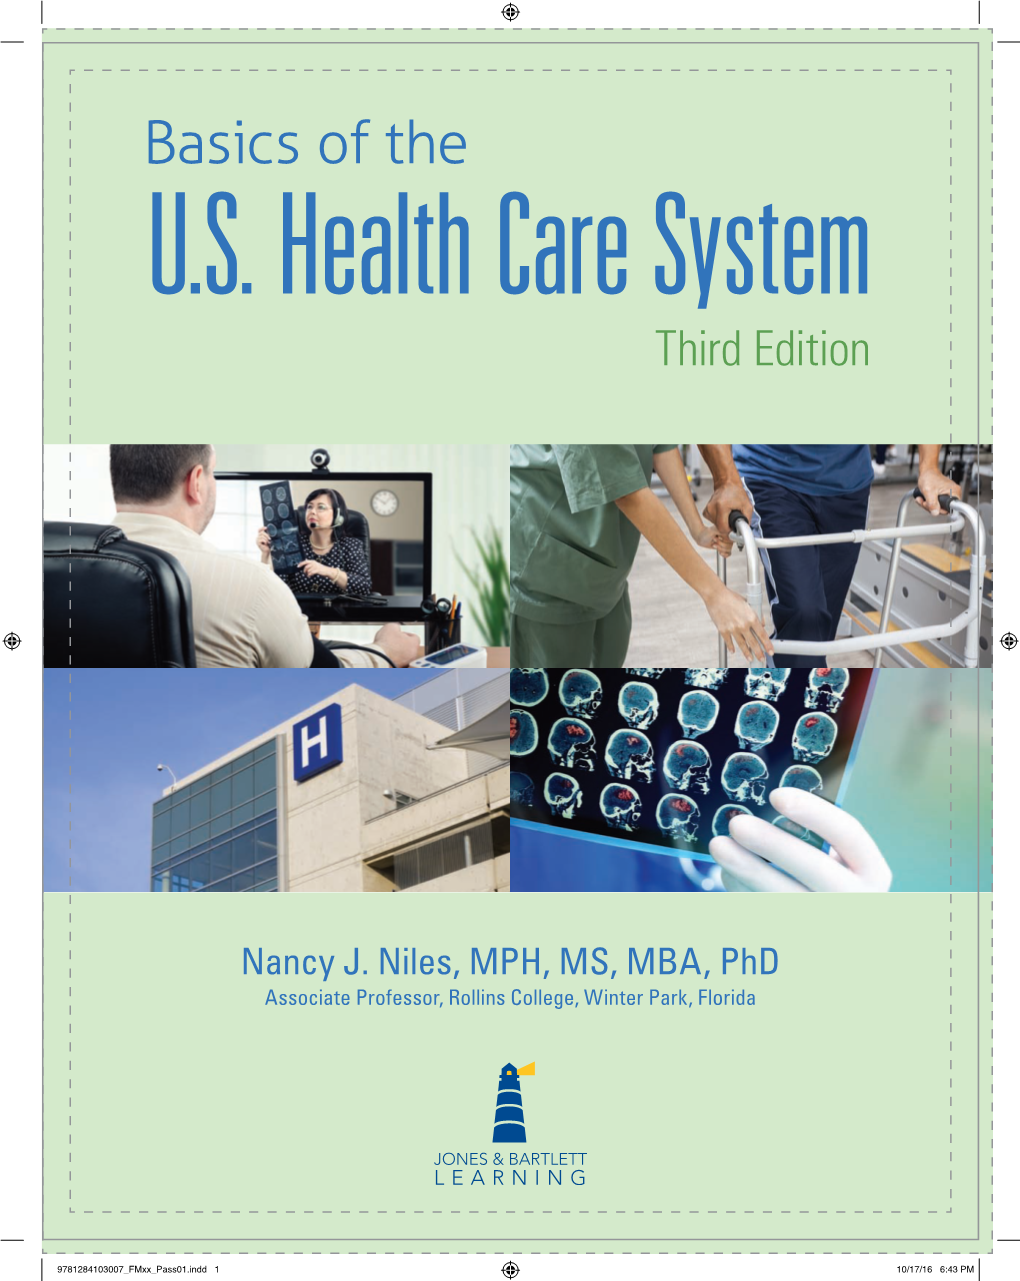 Basics of the US Health Care System